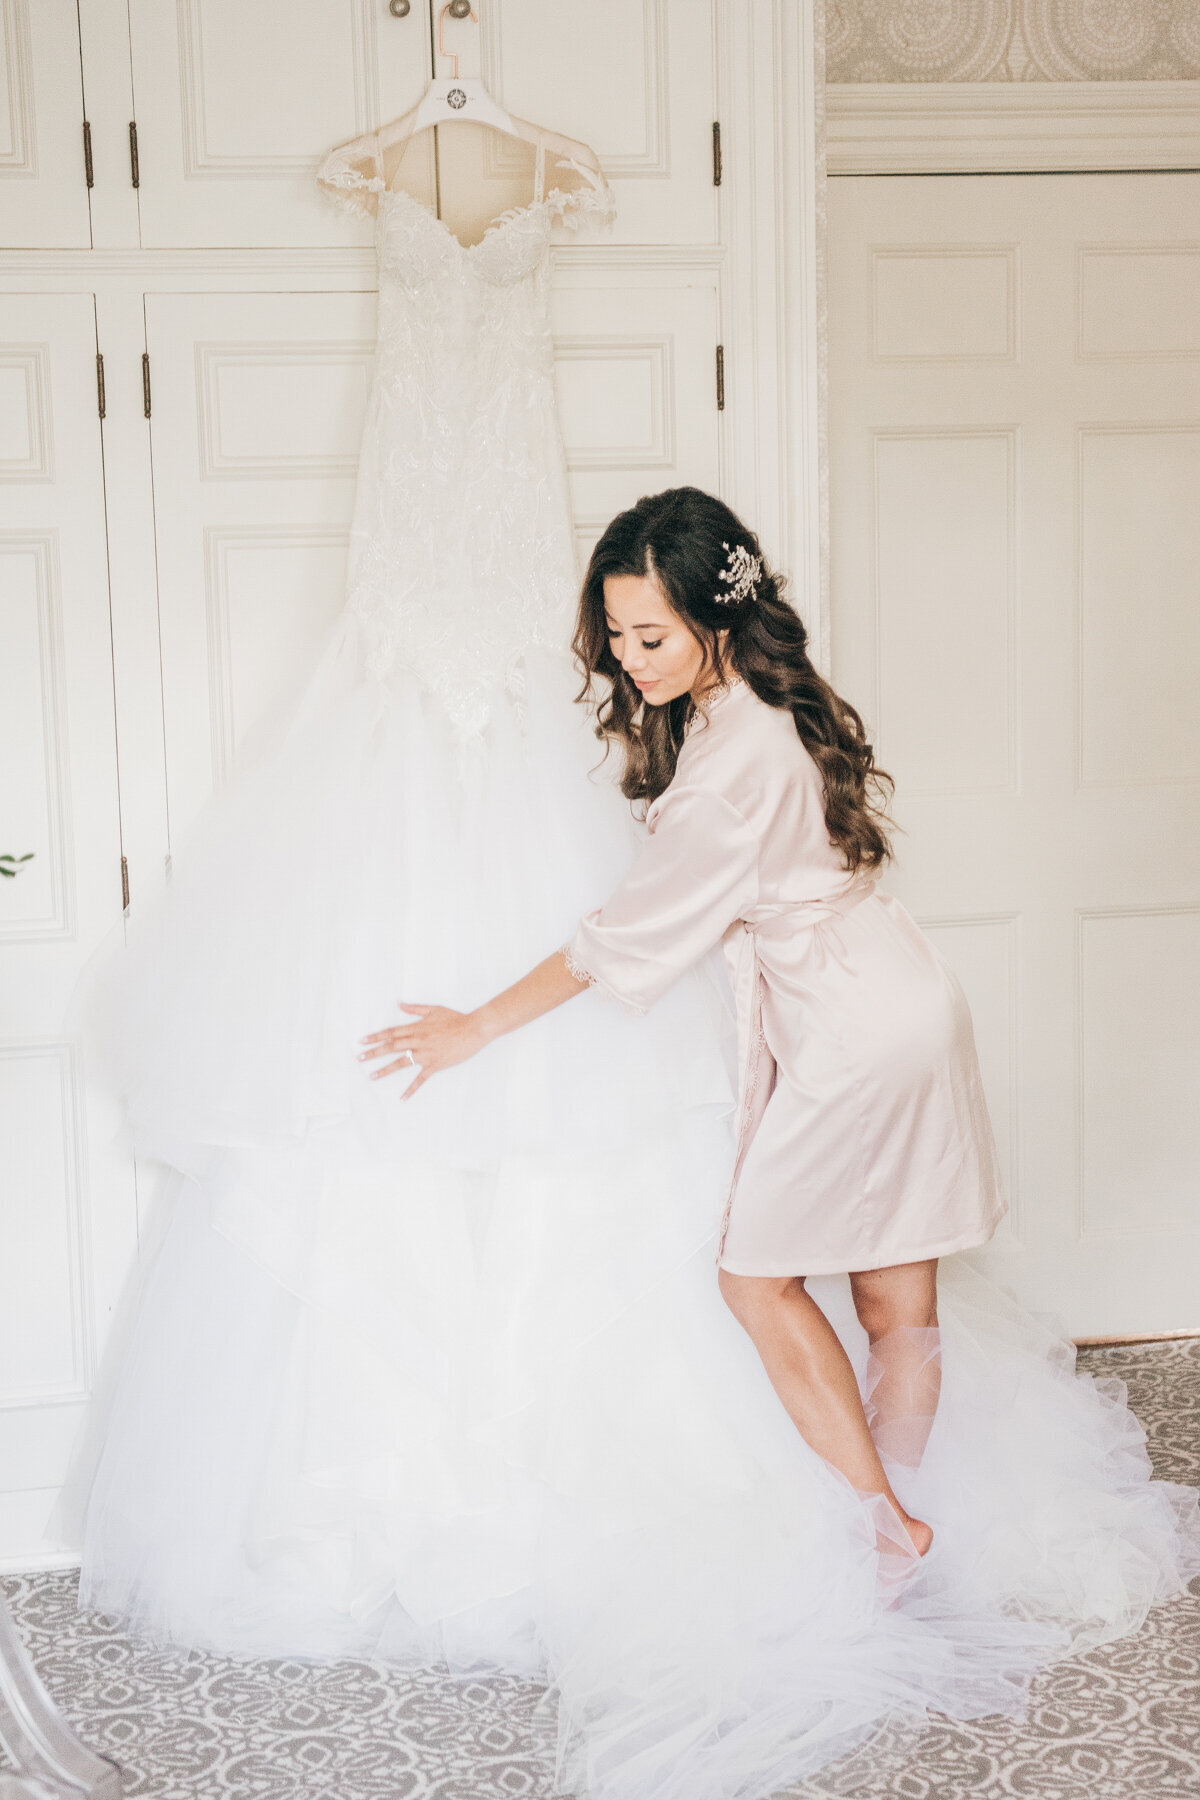 Bride getting ready with luxurious wedding dress